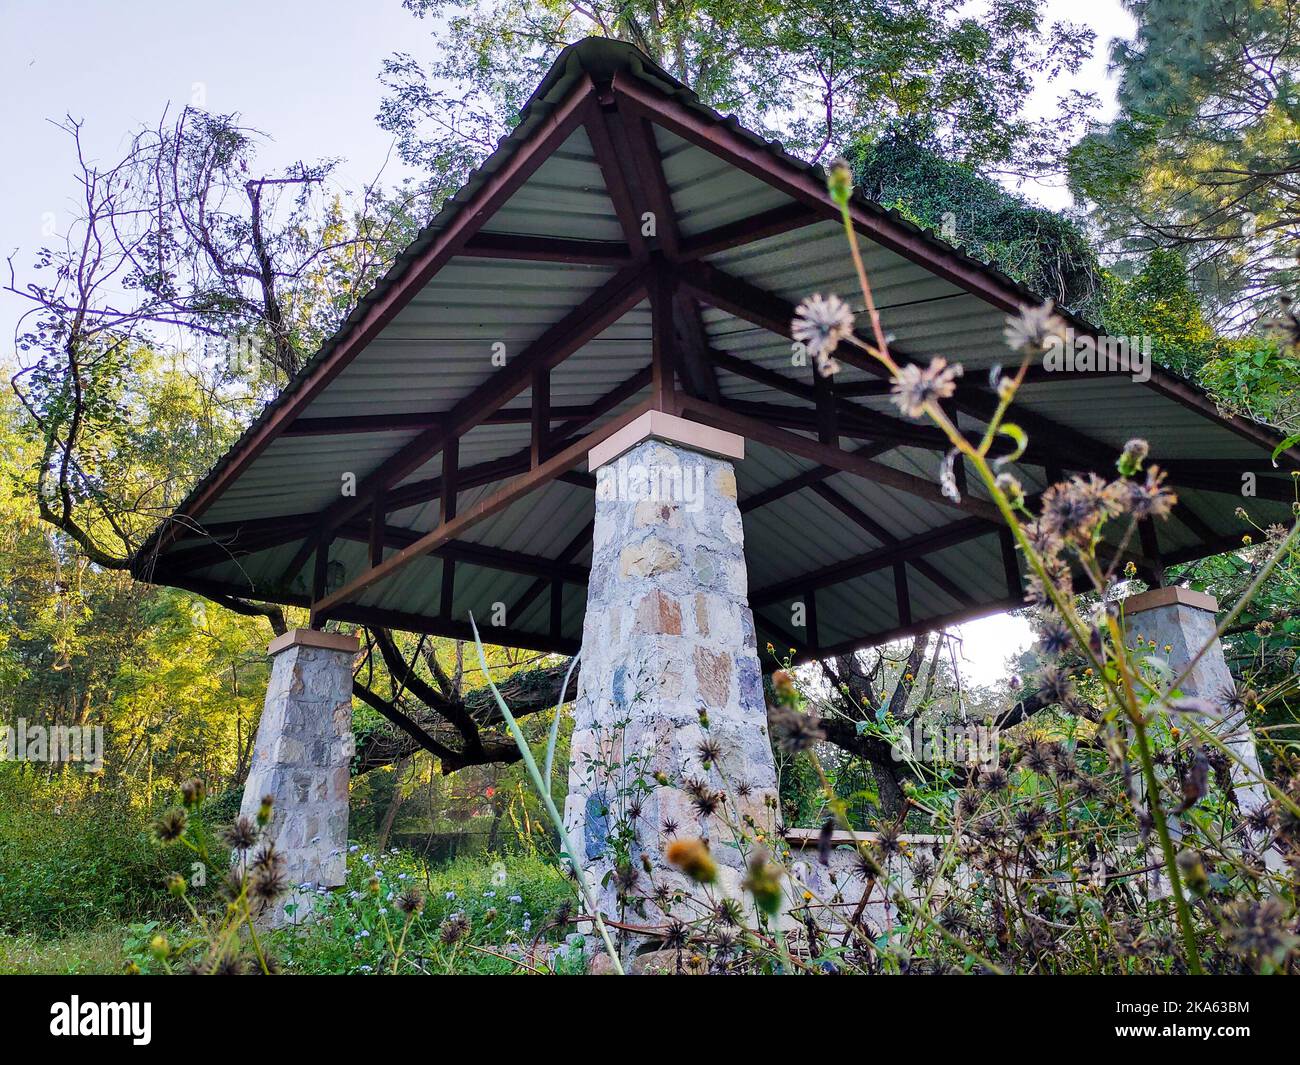 Outdoor patio pergola shade structure made of stones and metal roof top at a garden. Dehradun city India. Stock Photo